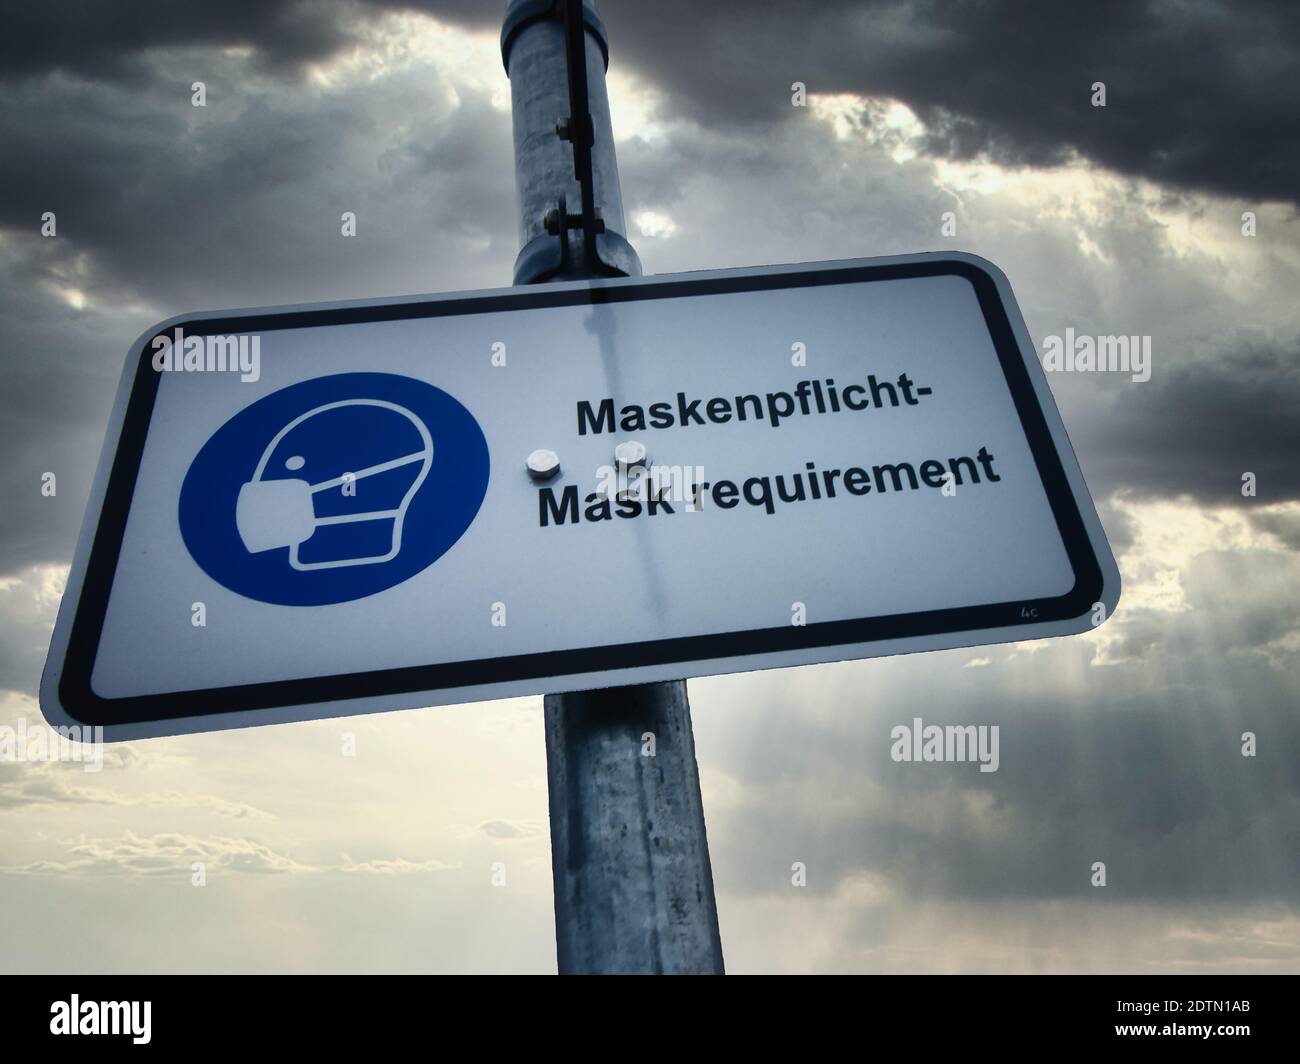 Mask requirement (german: 'Maskenpflicht') reminder on public place in Germany Stock Photo